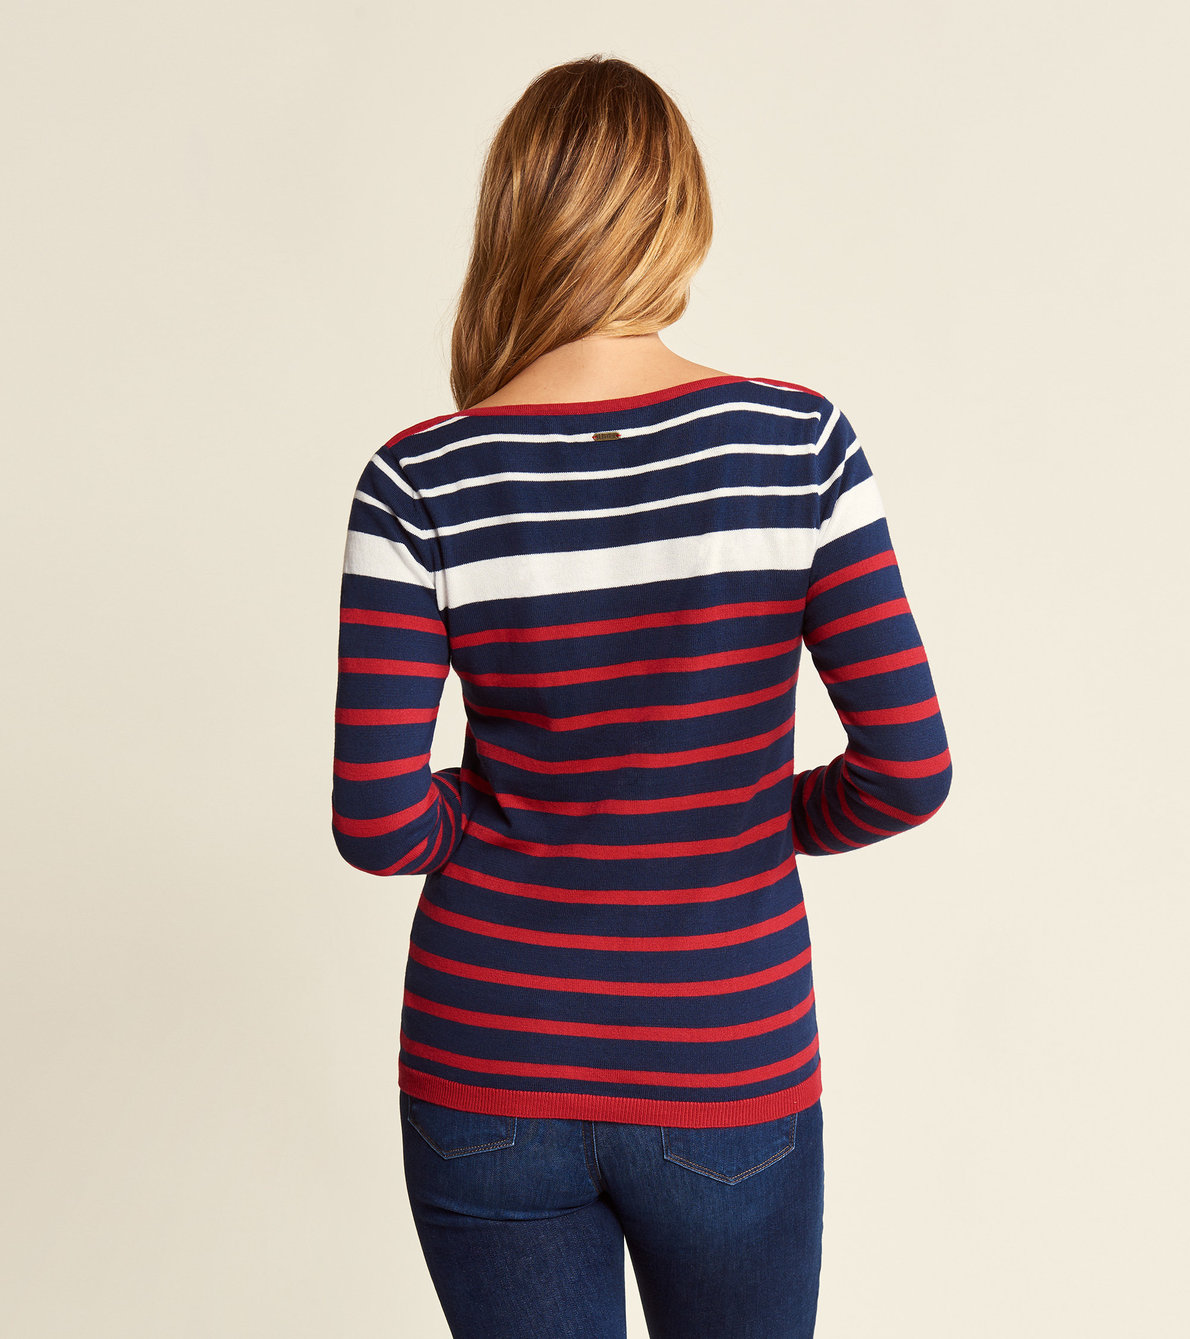 View larger image of Breton Sweater - Navy and Red Stripes